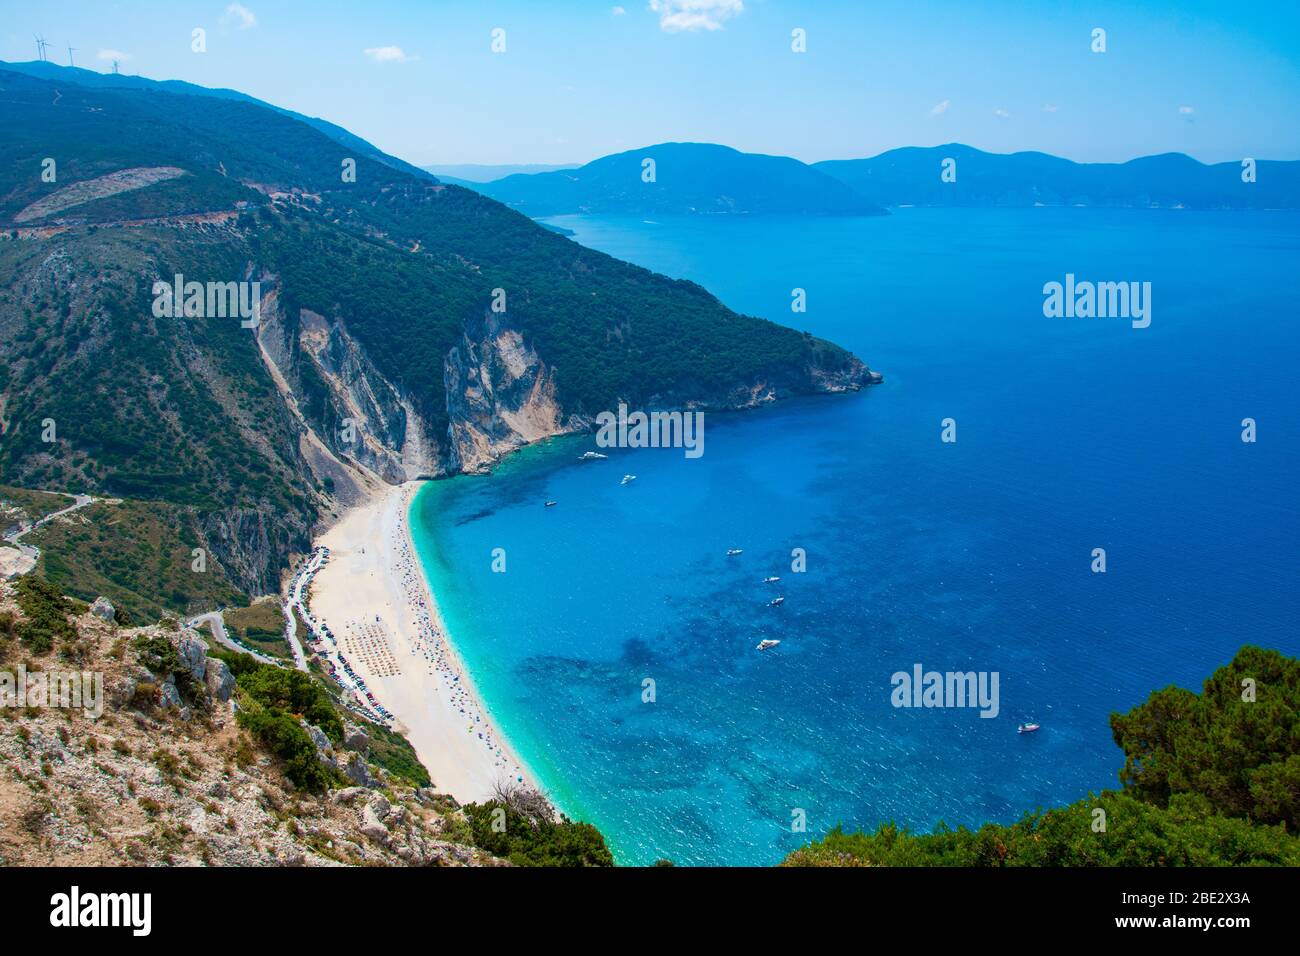 Aerial view of Myrtos beach in Kefalonia Ionian island in Greece. One of the most famous beaches in the world with turquoise crystal clear sea waters Stock Photo